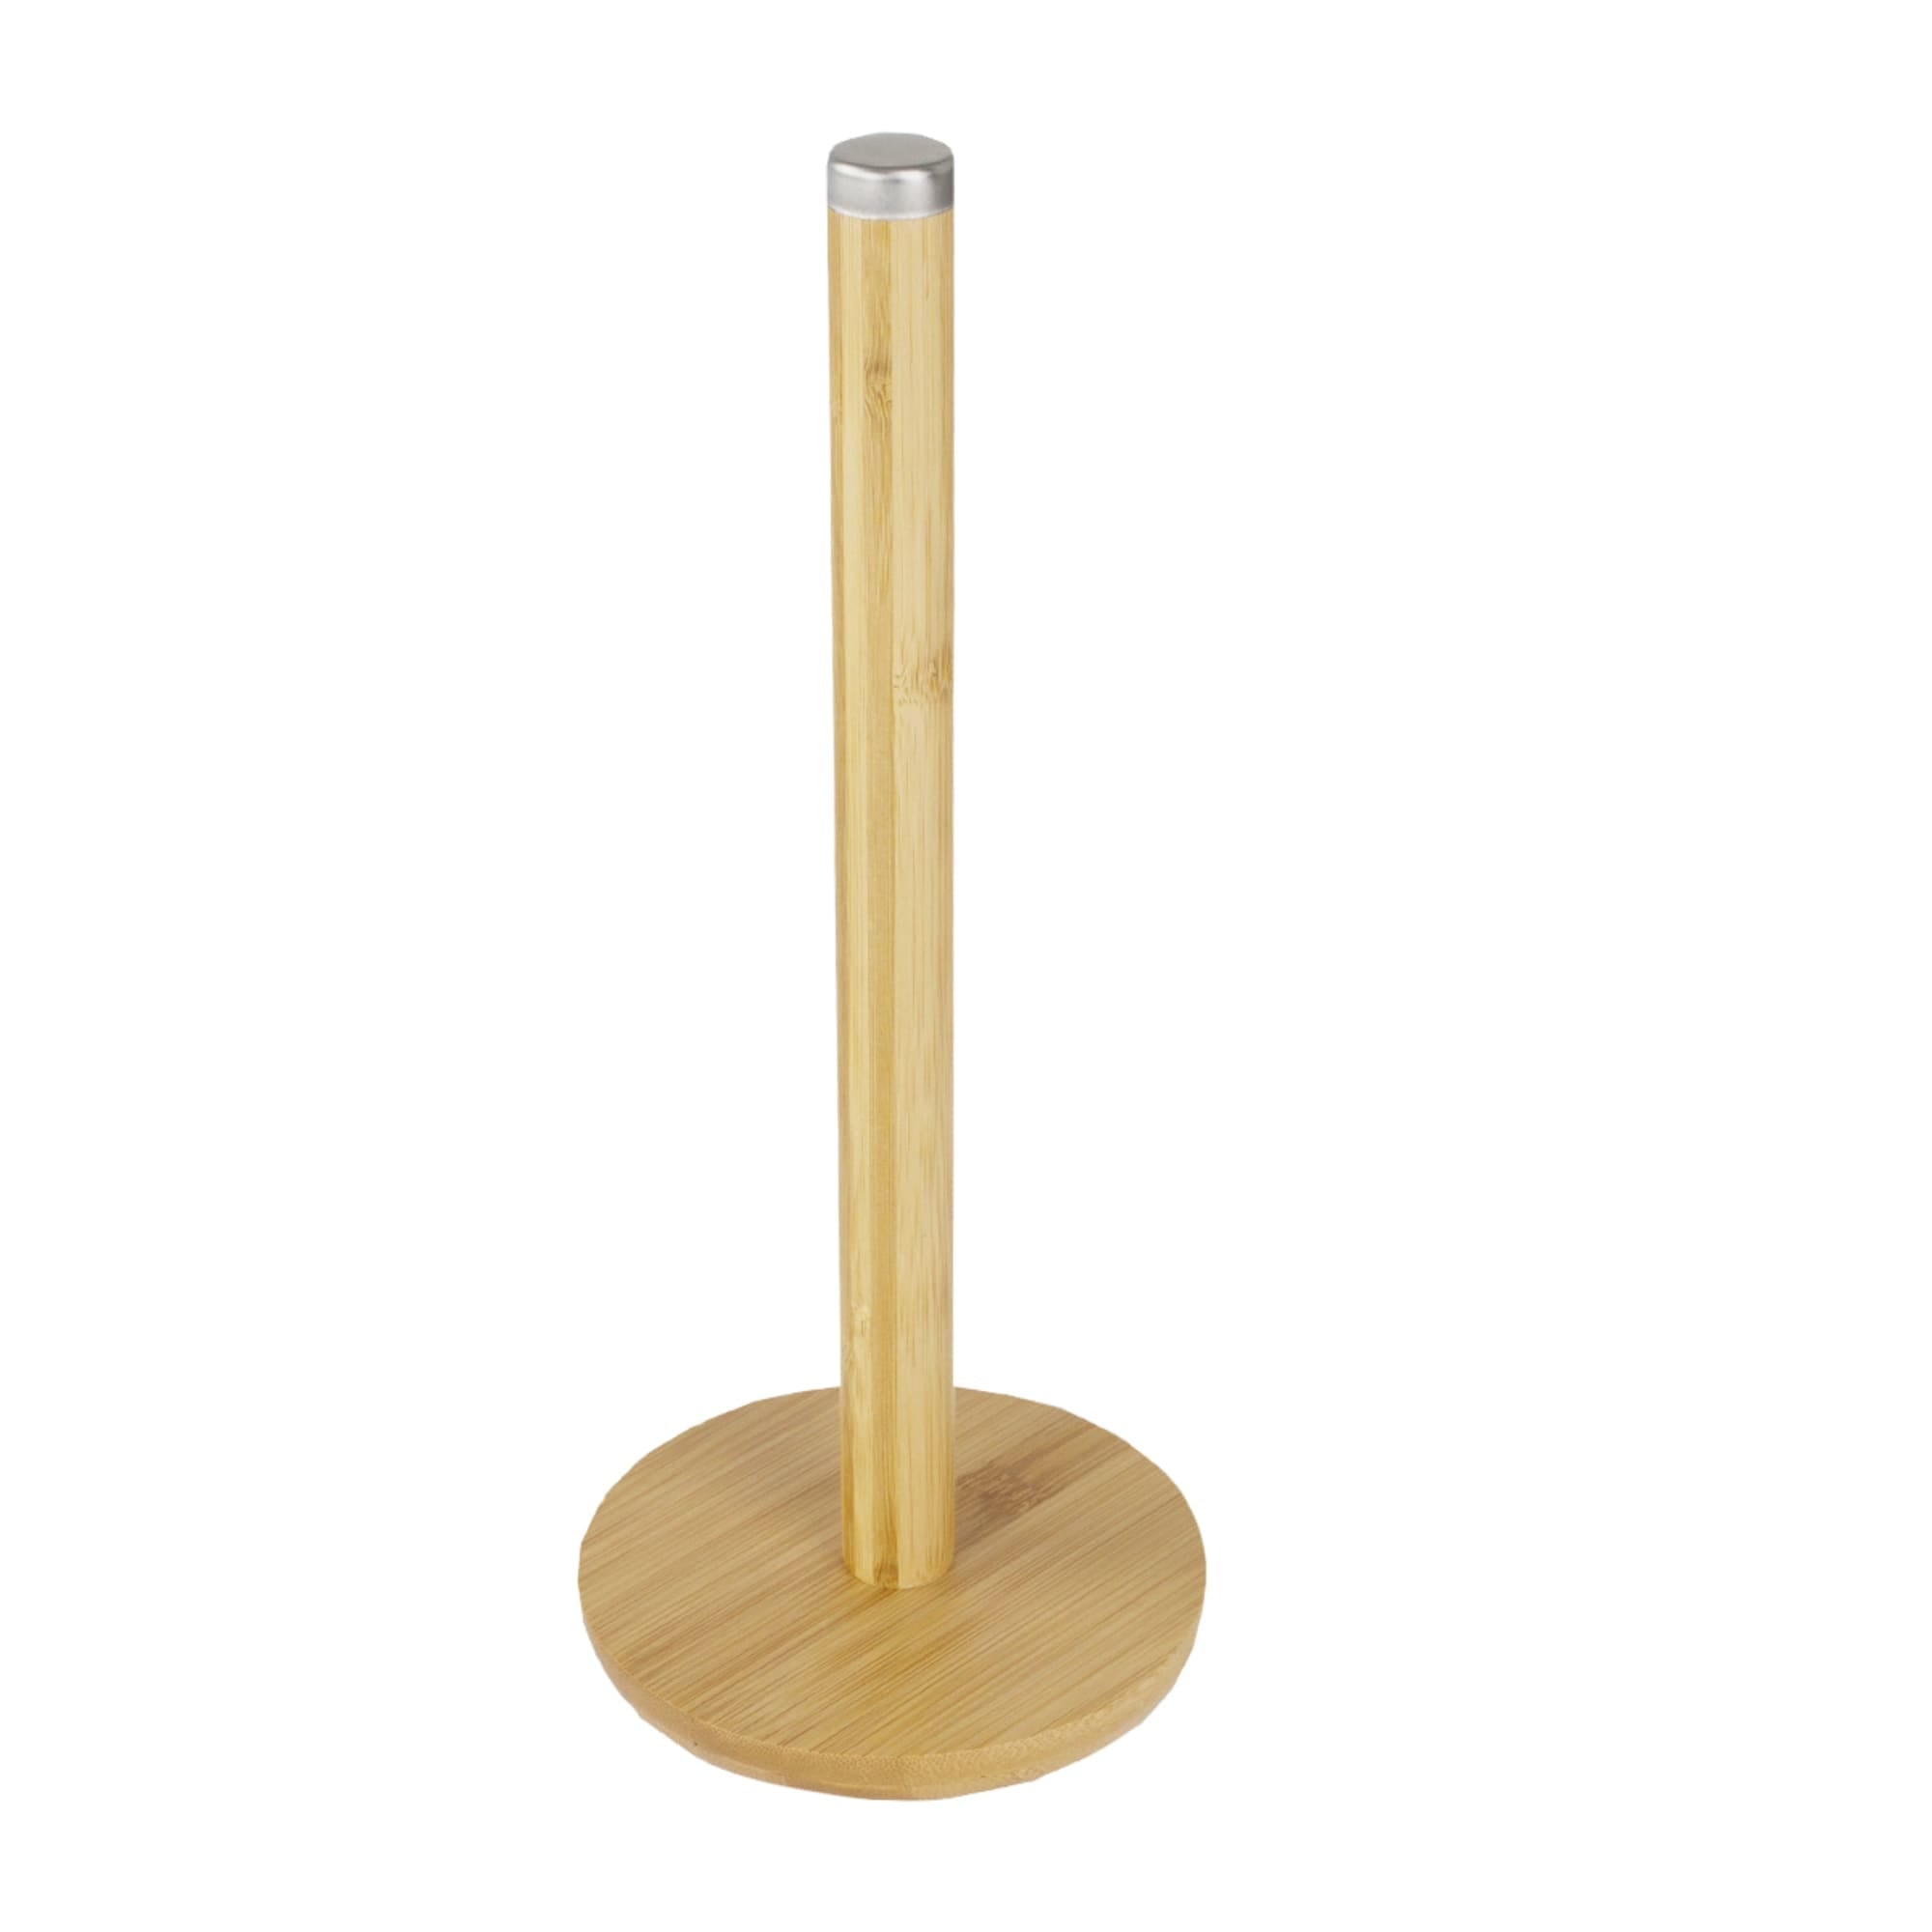 Home Basics Bamboo Paper Towel Holder with Stainless Steel Finial $4.00 EACH, CASE PACK OF 12